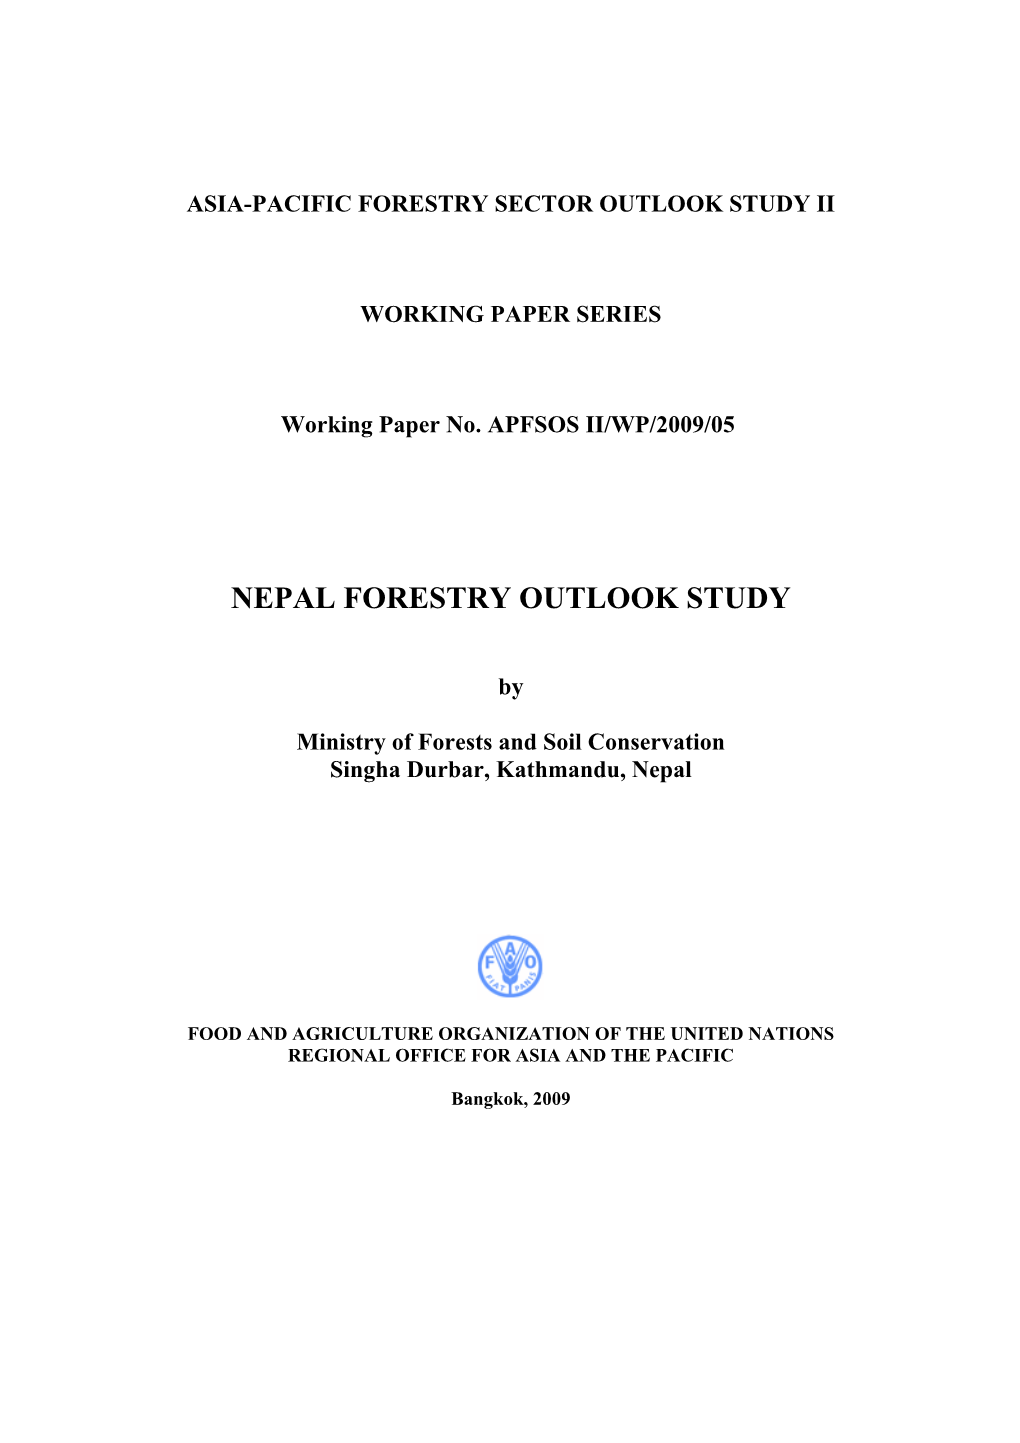 Nepal Forestry Outlook Study